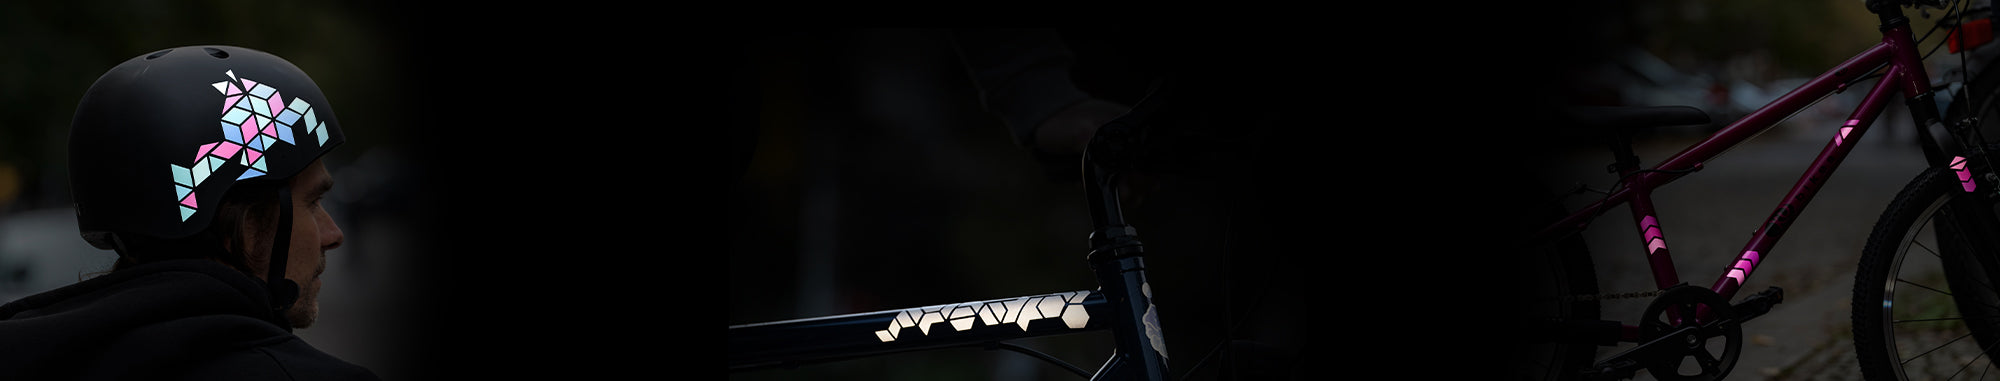 front of bicycle with reflective stickers